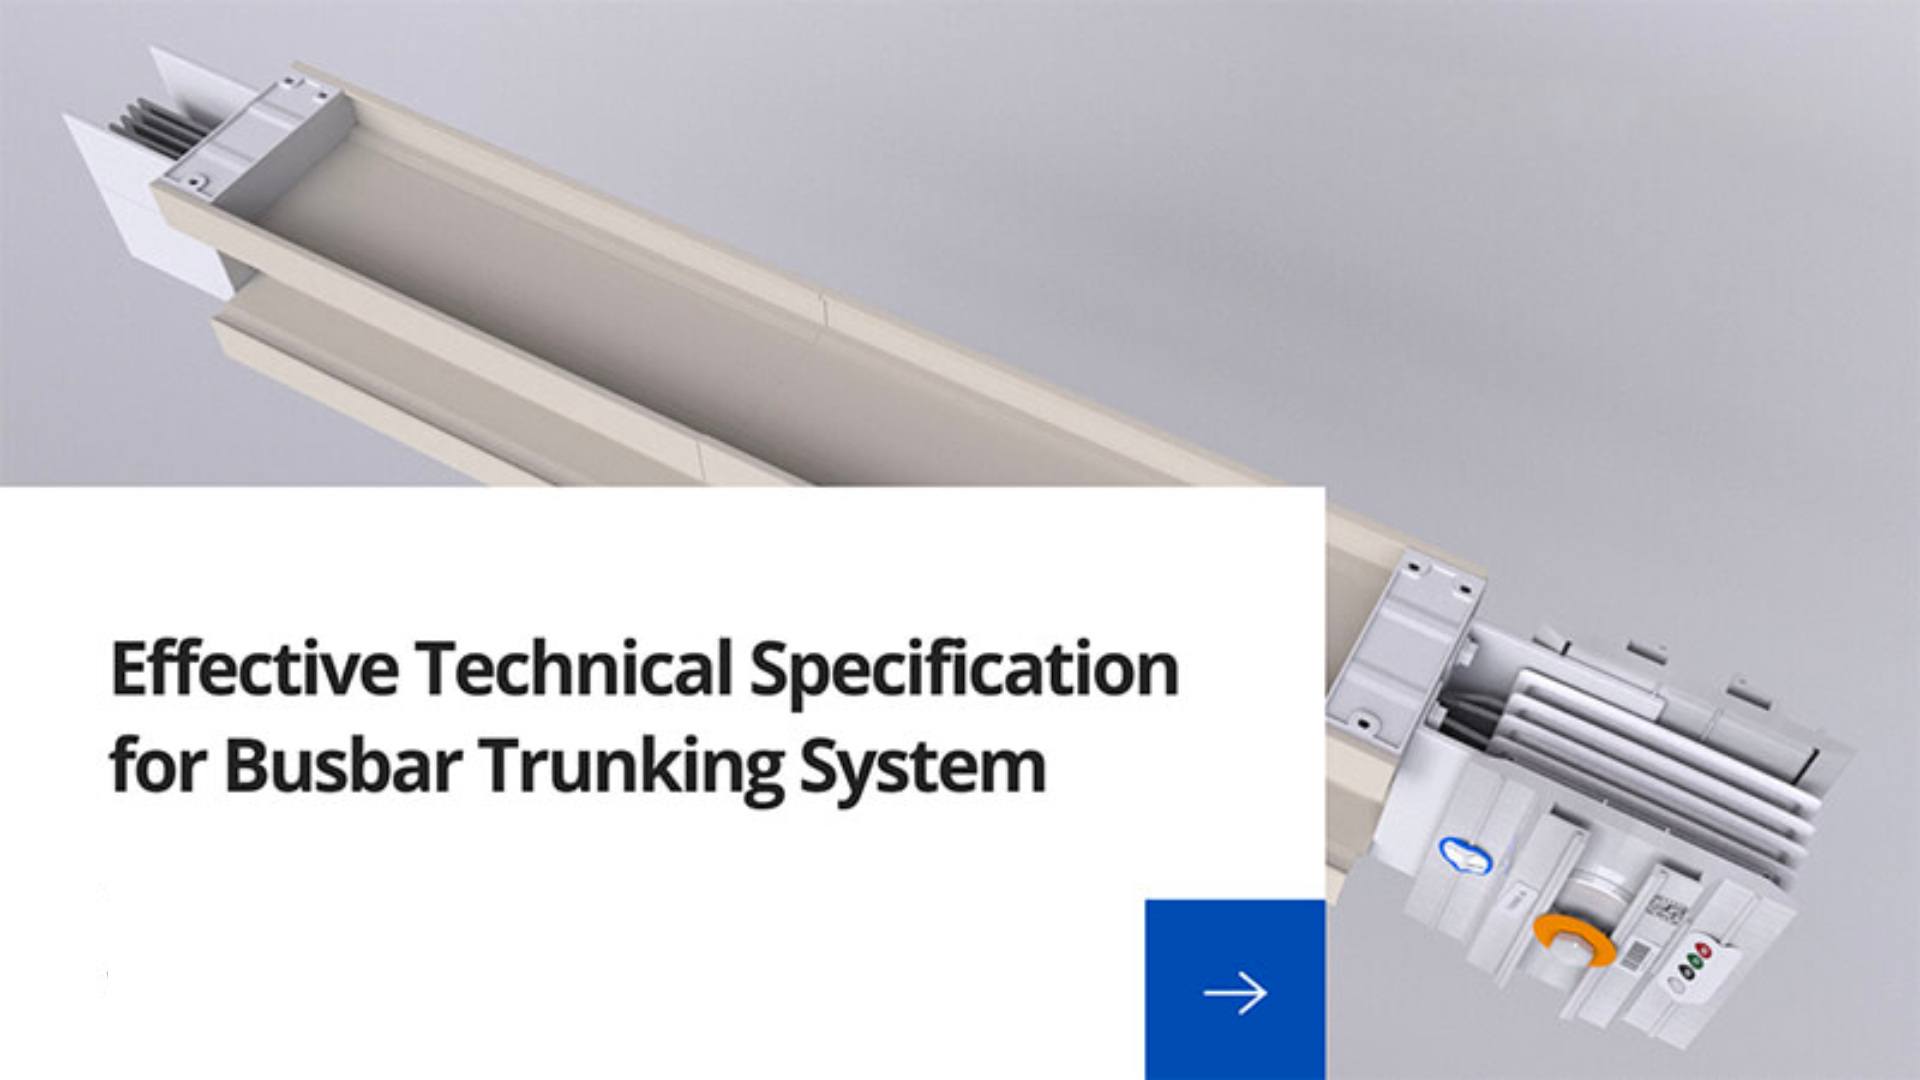 Webinars on Effective Technical Specification for BTS